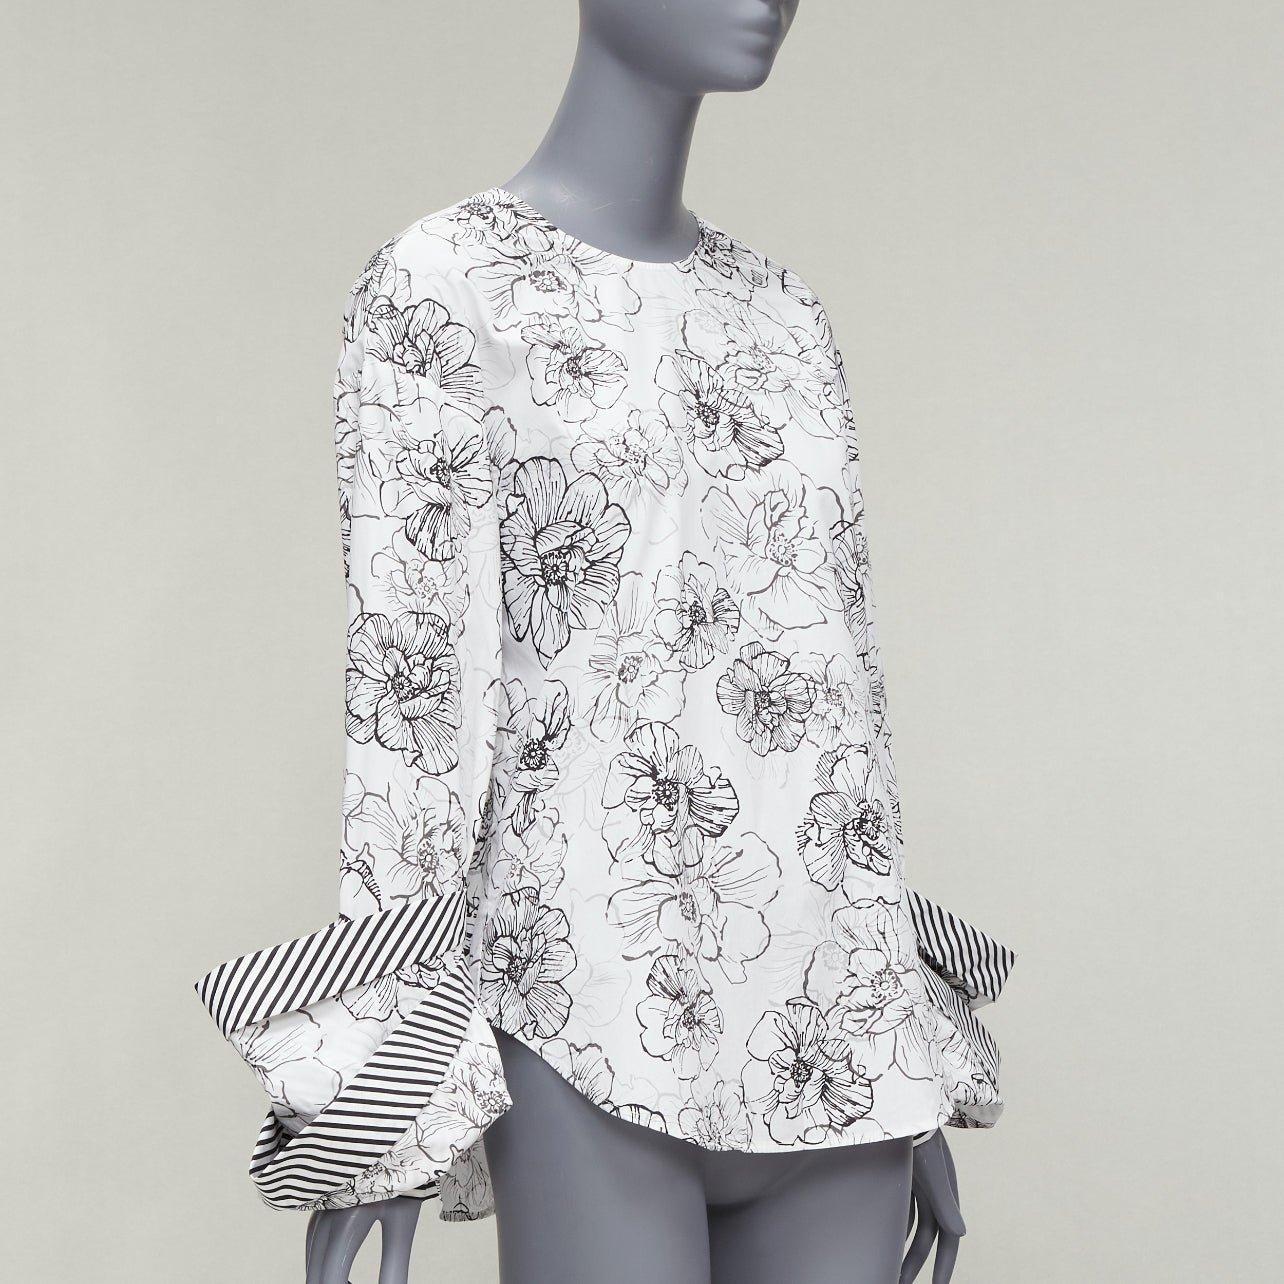 SILVIA TCHERASSI Jessica white floral print tiered cuff crew neck top S
Reference: AAWC/A00669
Brand: Silvia Tcherassi
Model: Jessica
Material: Cotton
Color: Black, White
Pattern: Floral
Closure: Button
Extra Details: lack and white cotton Jessica